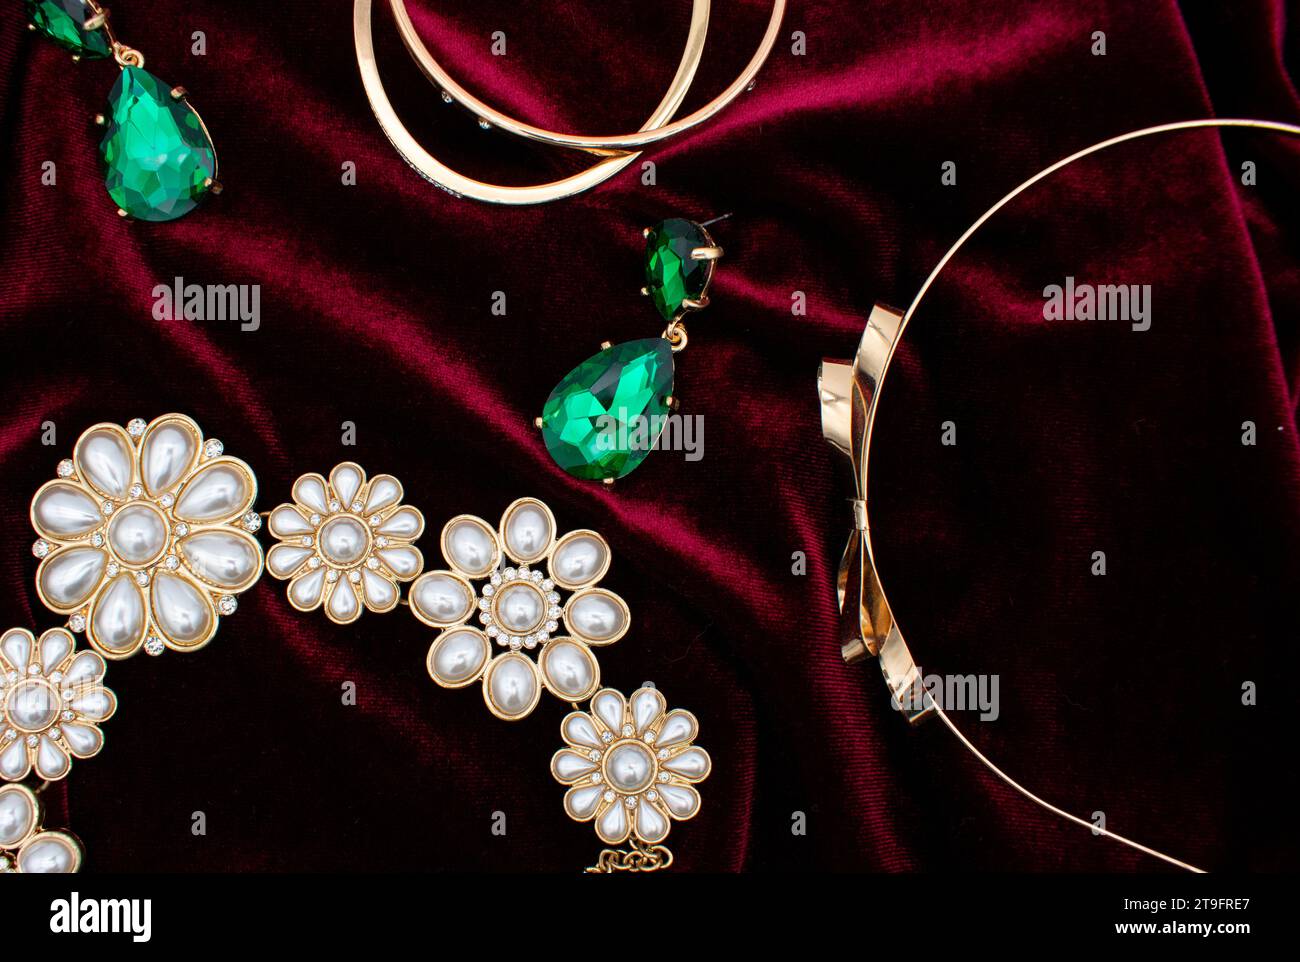 Flat lay photo of a christmas party outfit with gold and green earrings, jewelry, and pearl necklace on a red velvet dress background Stock Photo